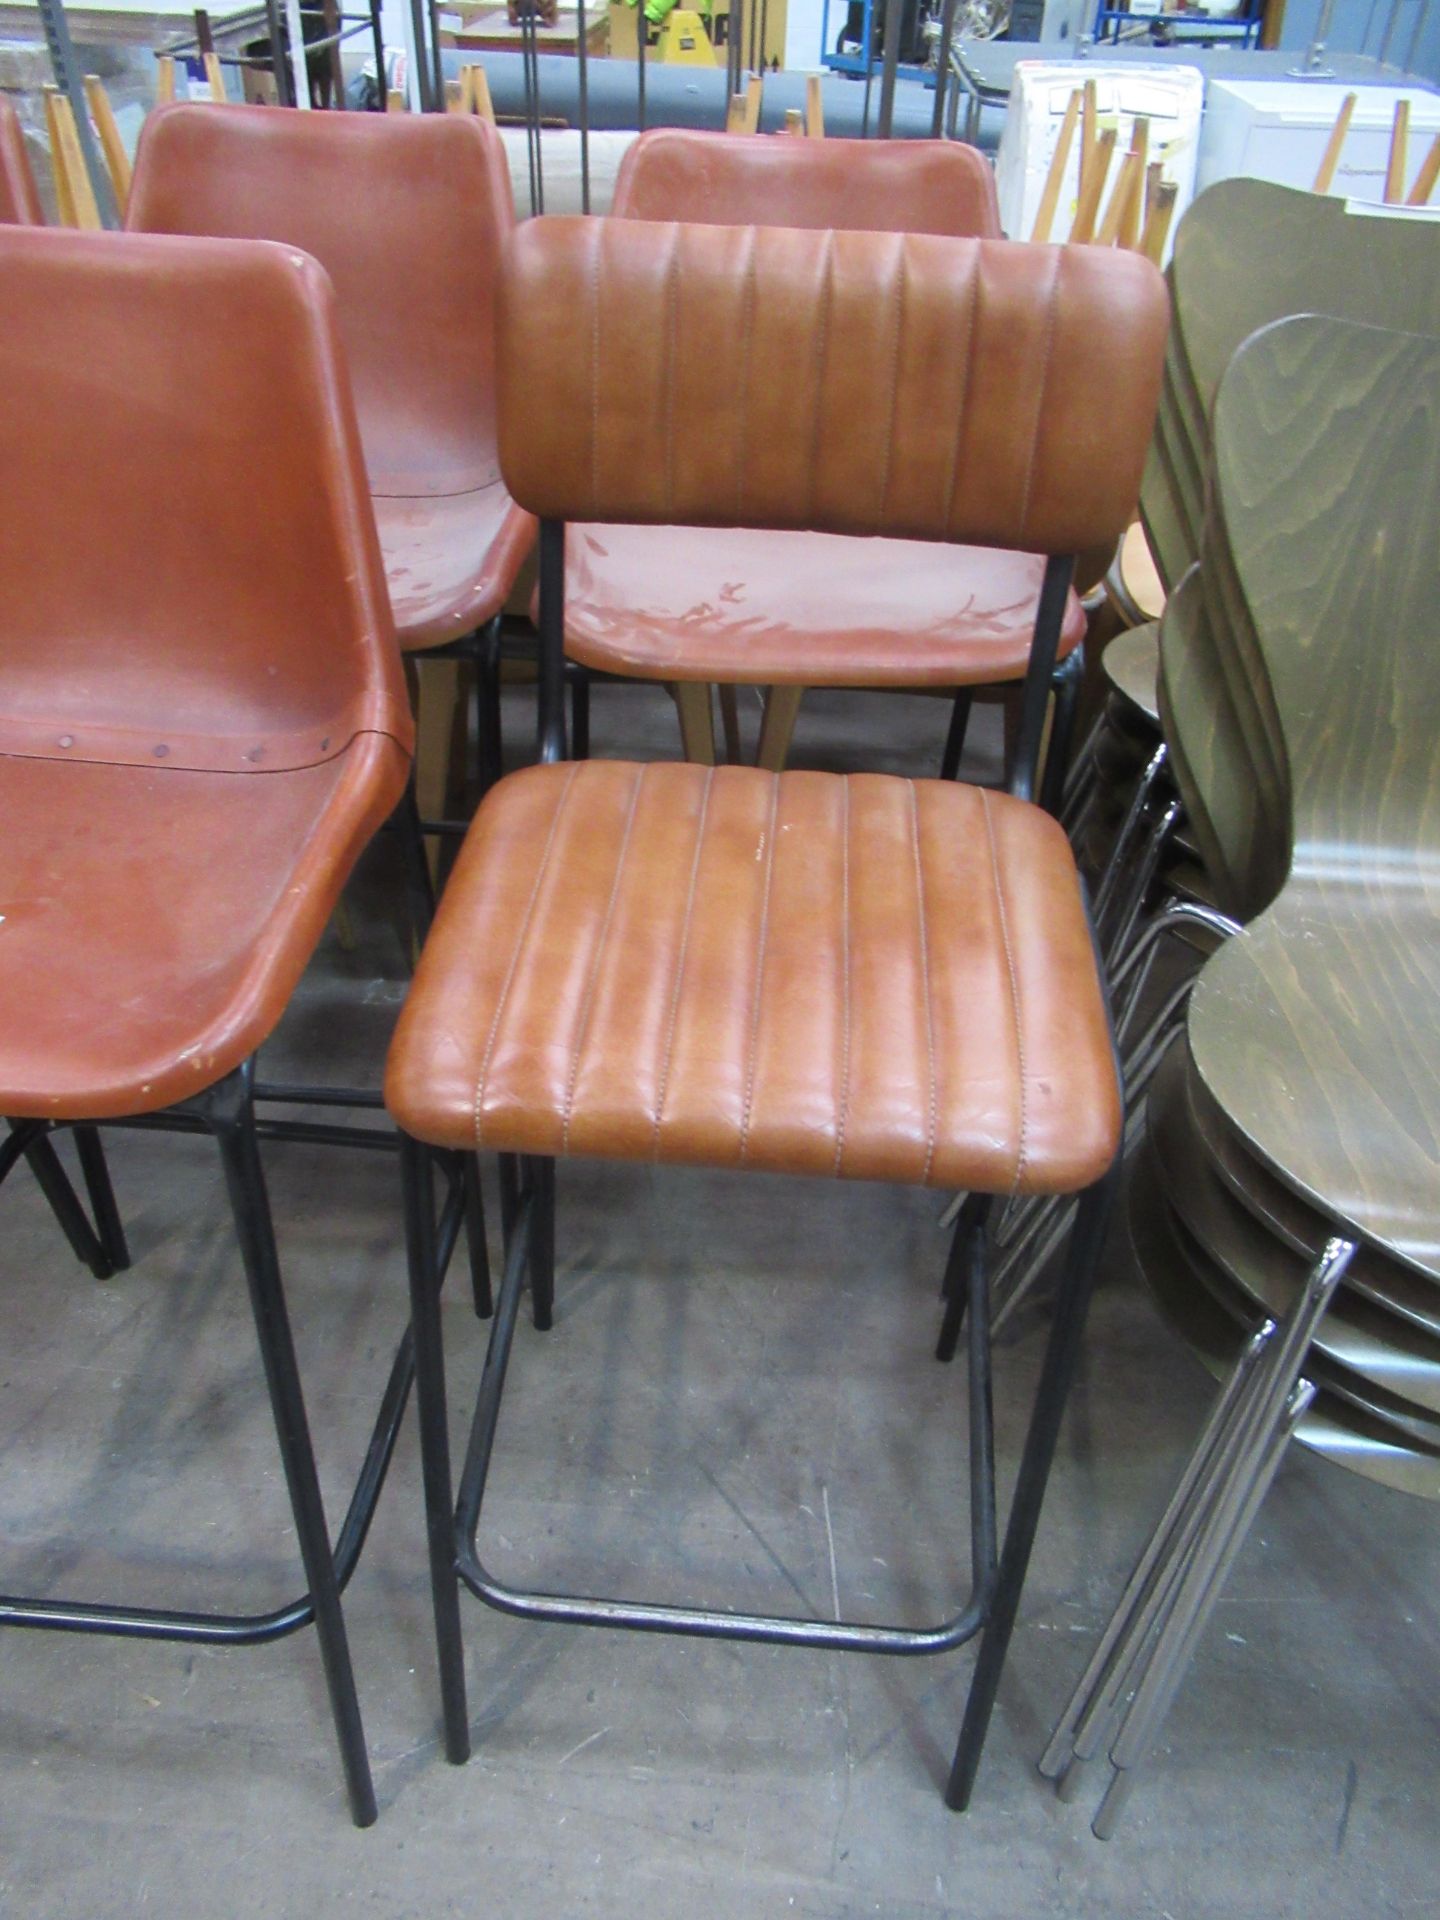 5x Matching Stools and 1x Other - Image 3 of 3